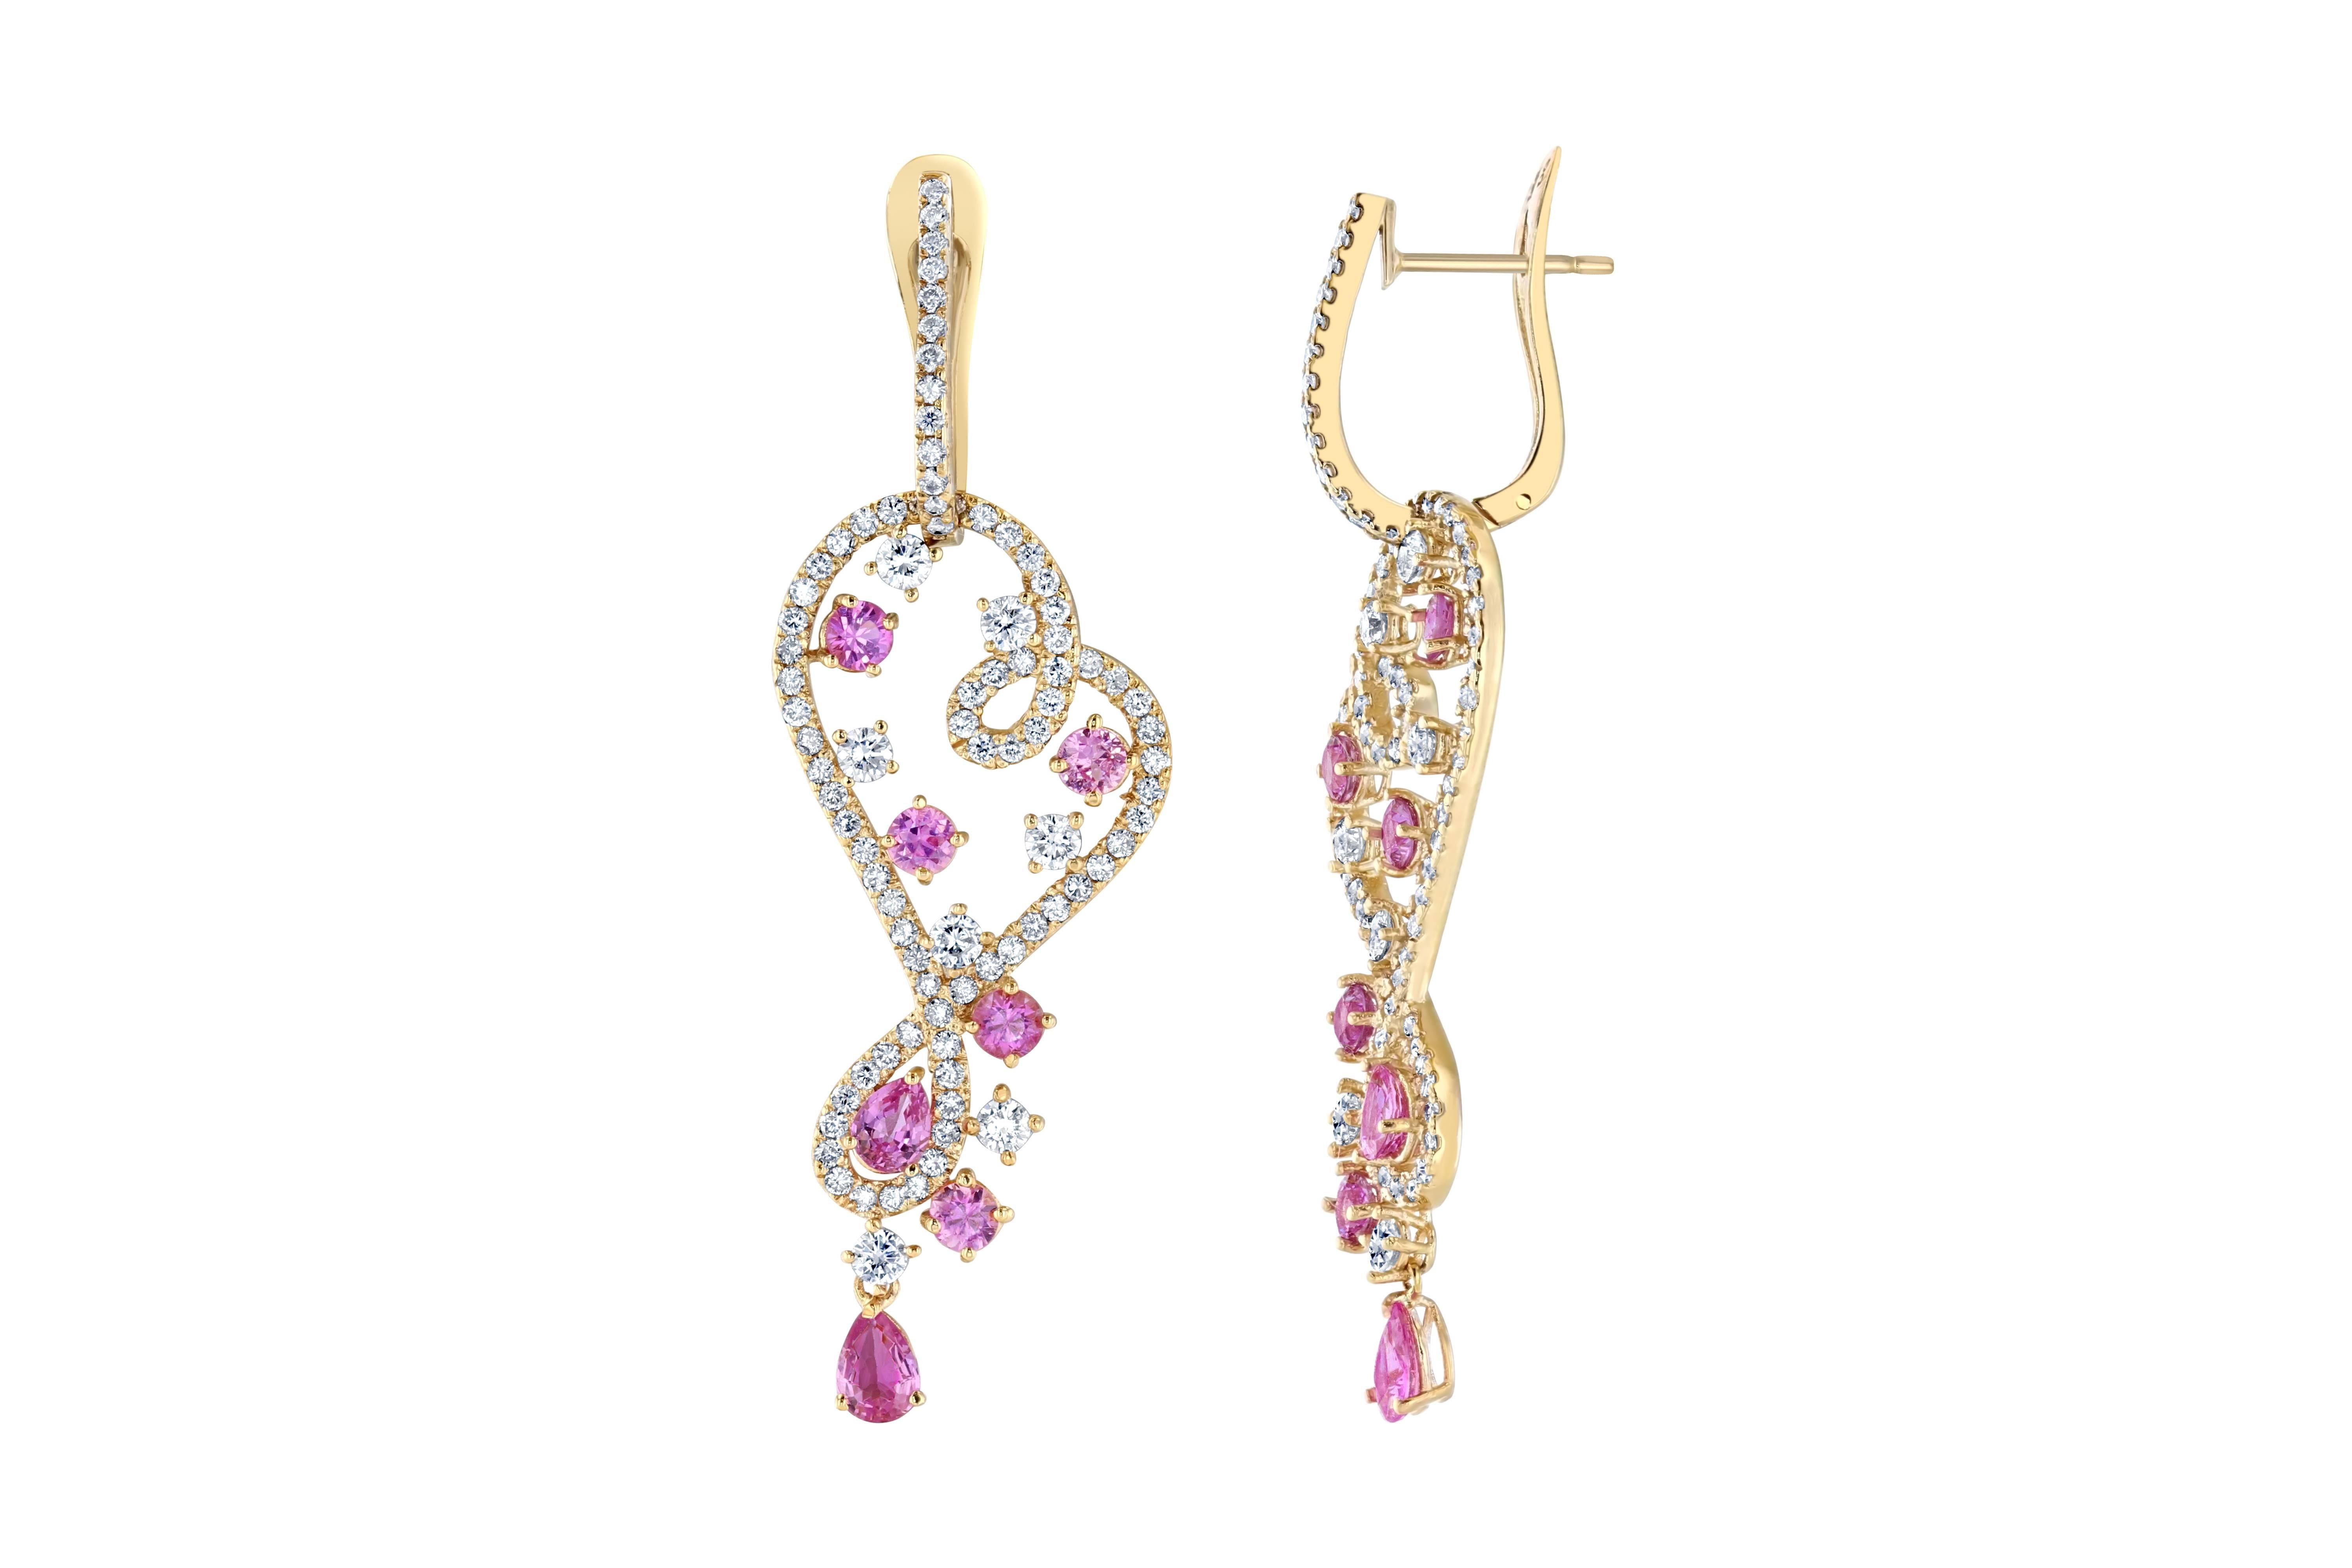 Pretty in Pink! The beautiful earrings have 14 Pink Sapphires that weigh 3.52 carats and are surrounded by 174 Round Cut Diamonds that weigh 2.98 carats.  The earrings are approximately 2.5 inches long.   They are casted in 14K yellow gold and weigh